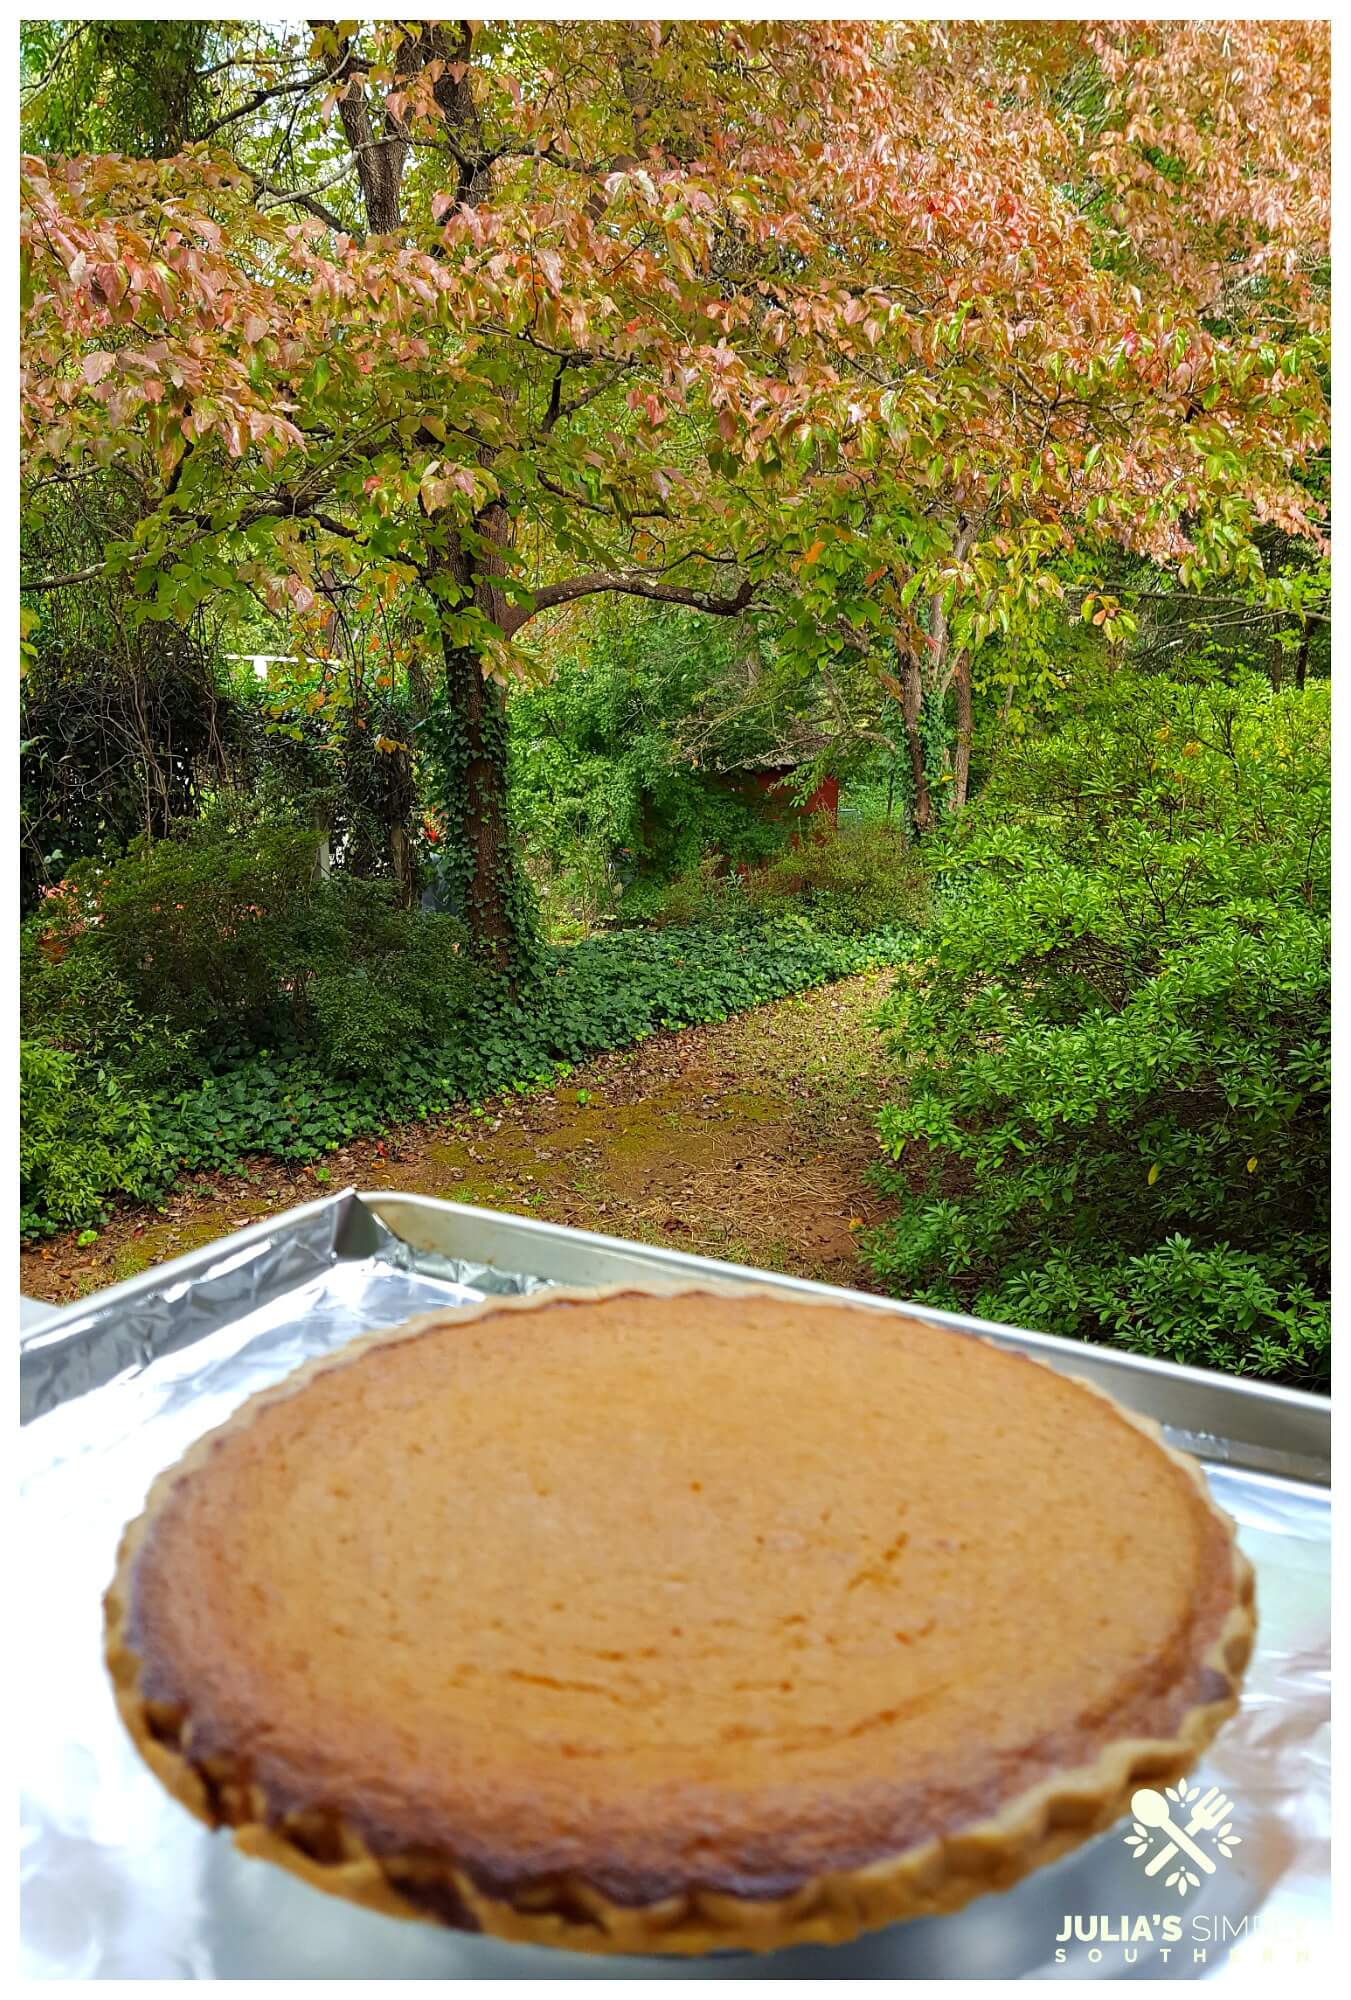 Homemade sweet potato pie cooling on a Southern porch during fall